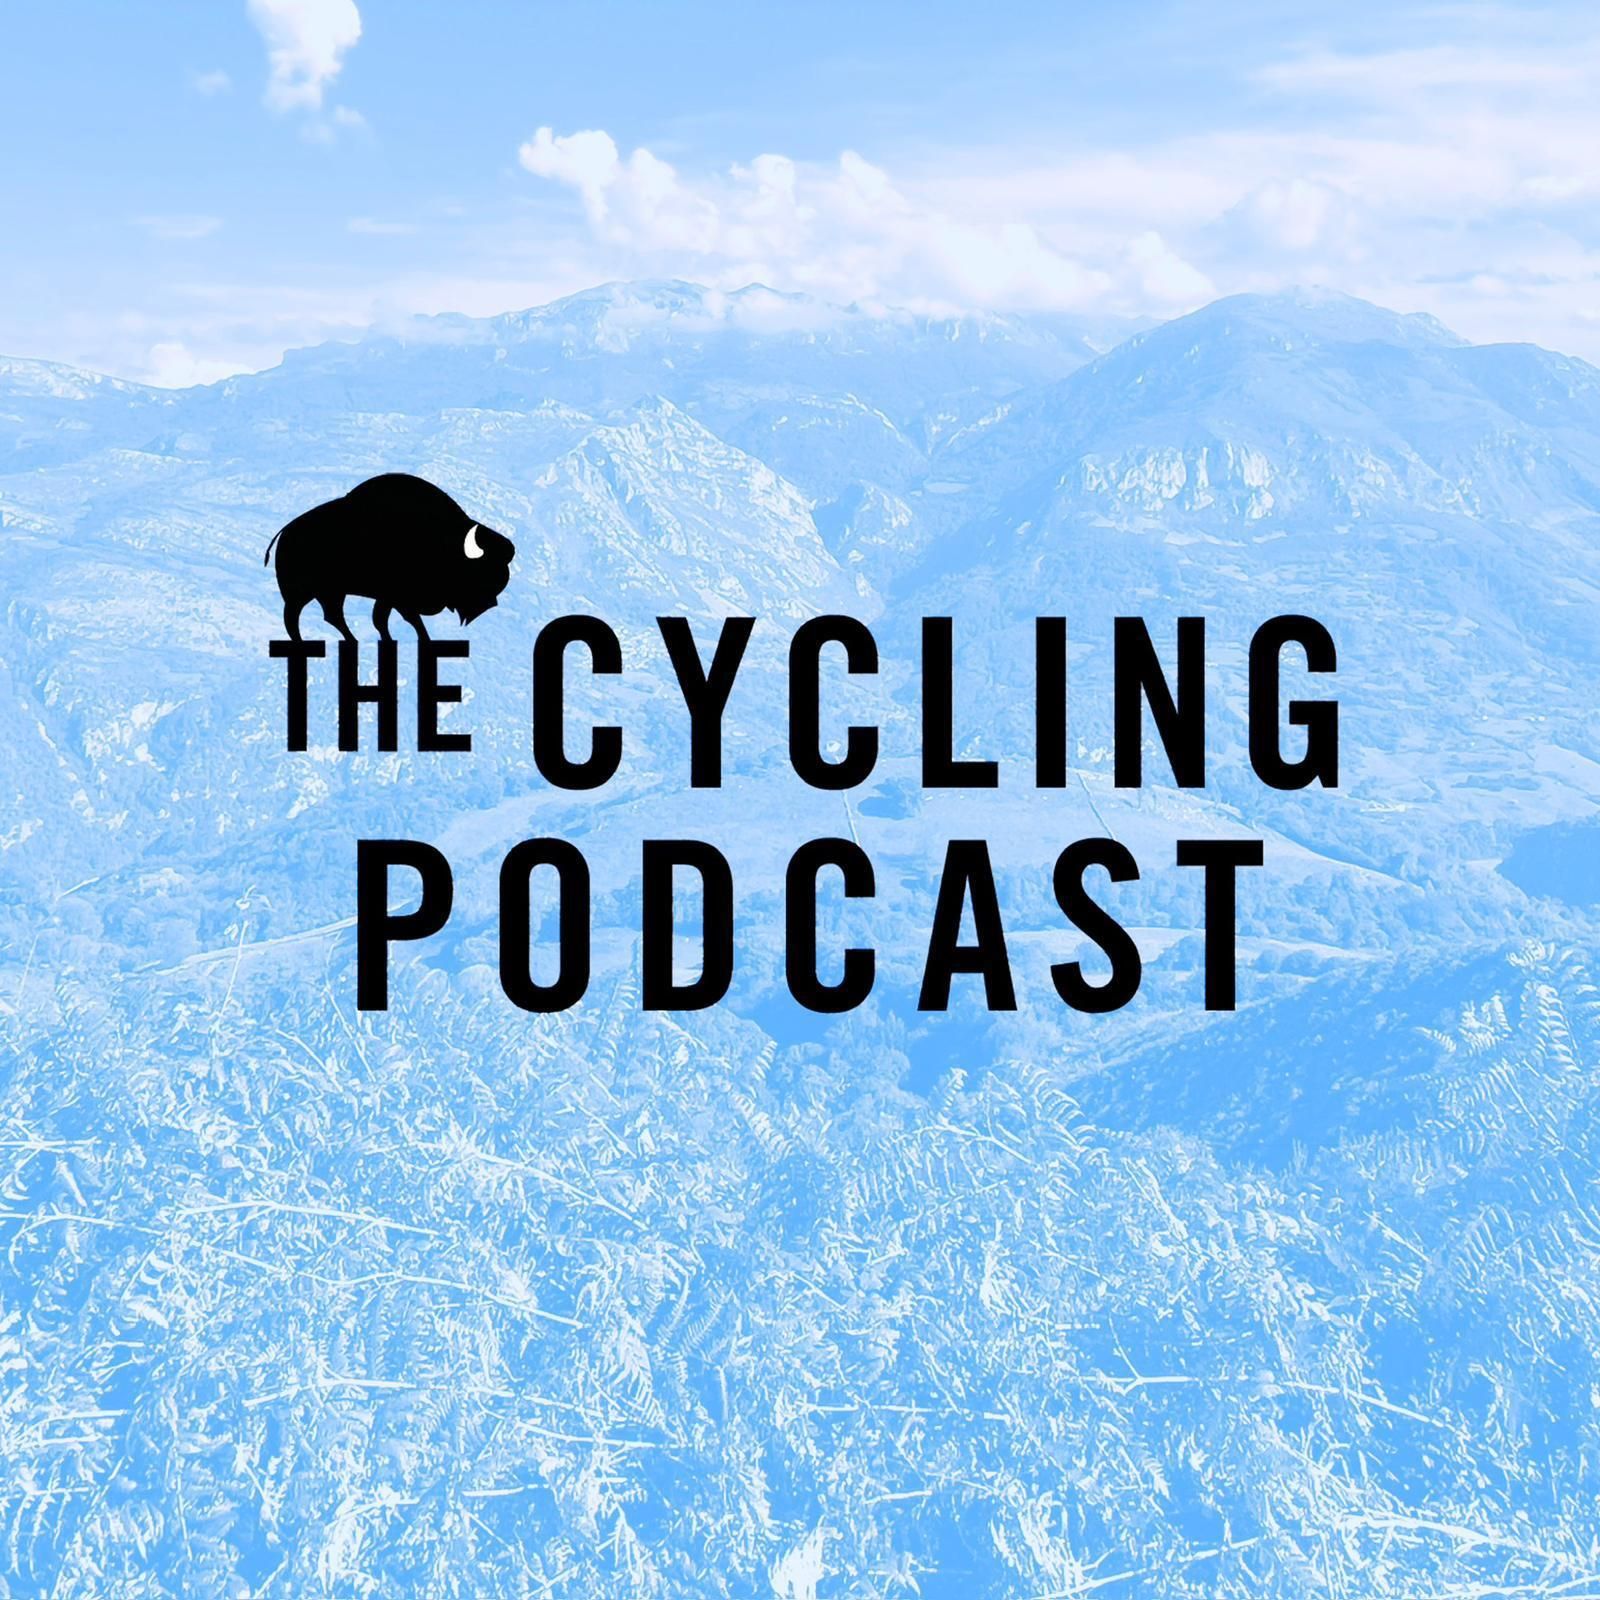 The Cycling Podcast podcast show image